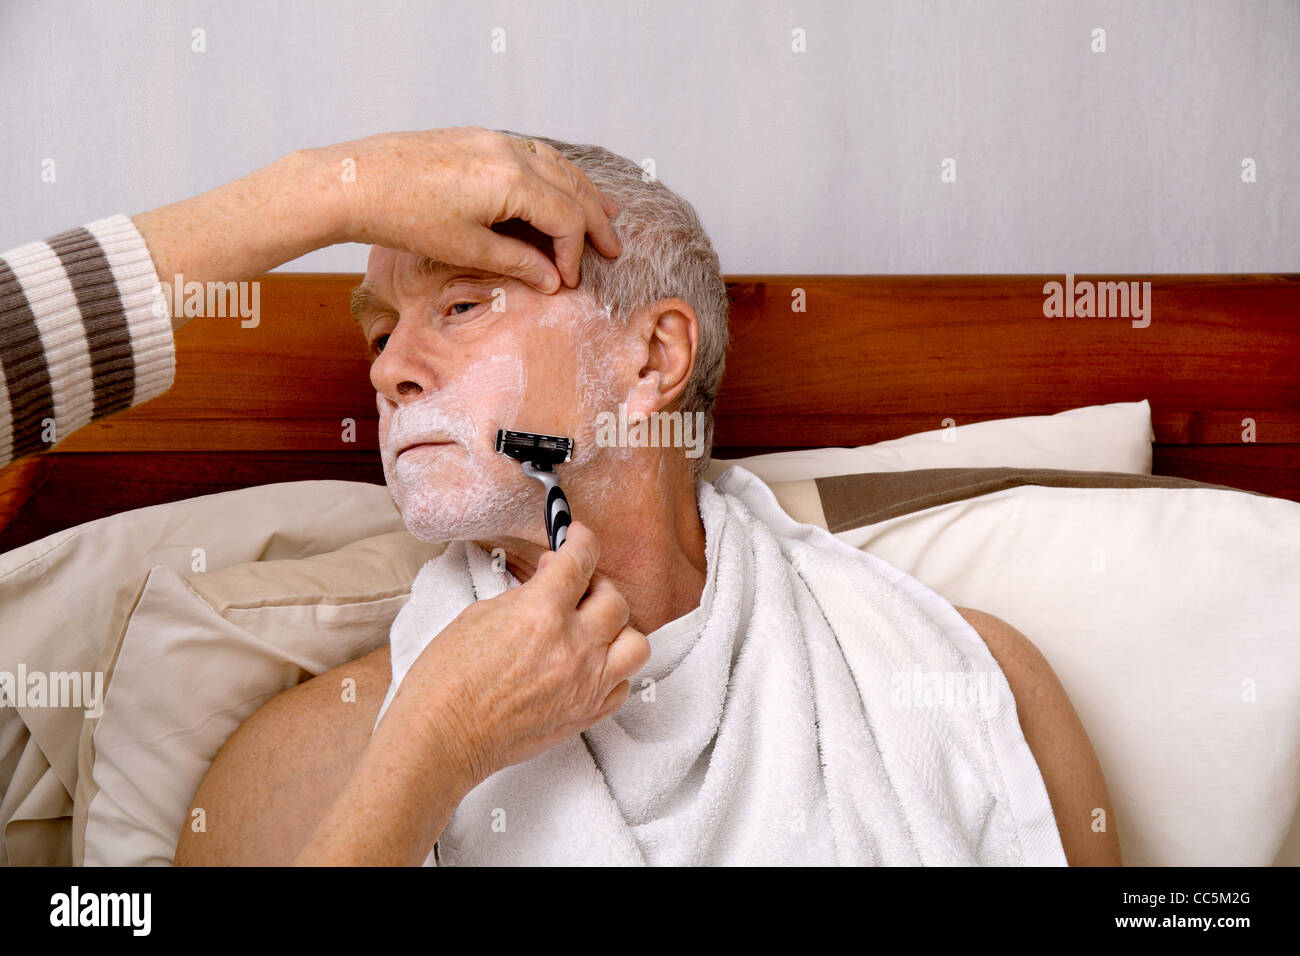 A man in his 60's being shaved by his wife/carer, at home in bed Stock Photo